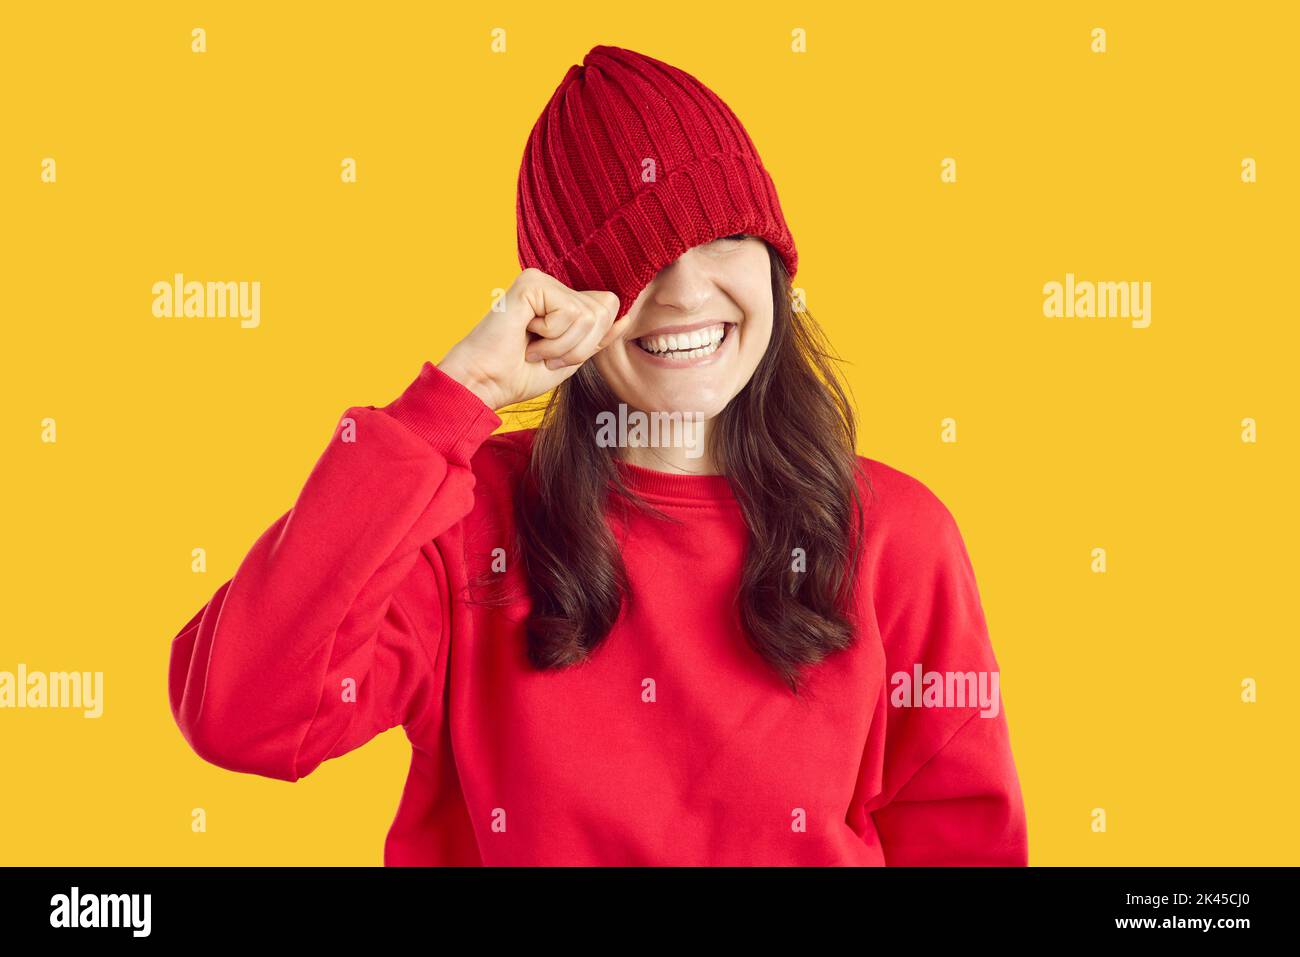 Funny cute young woman laughs and hides her eyes by pulling knitted hat over them. Stock Photo